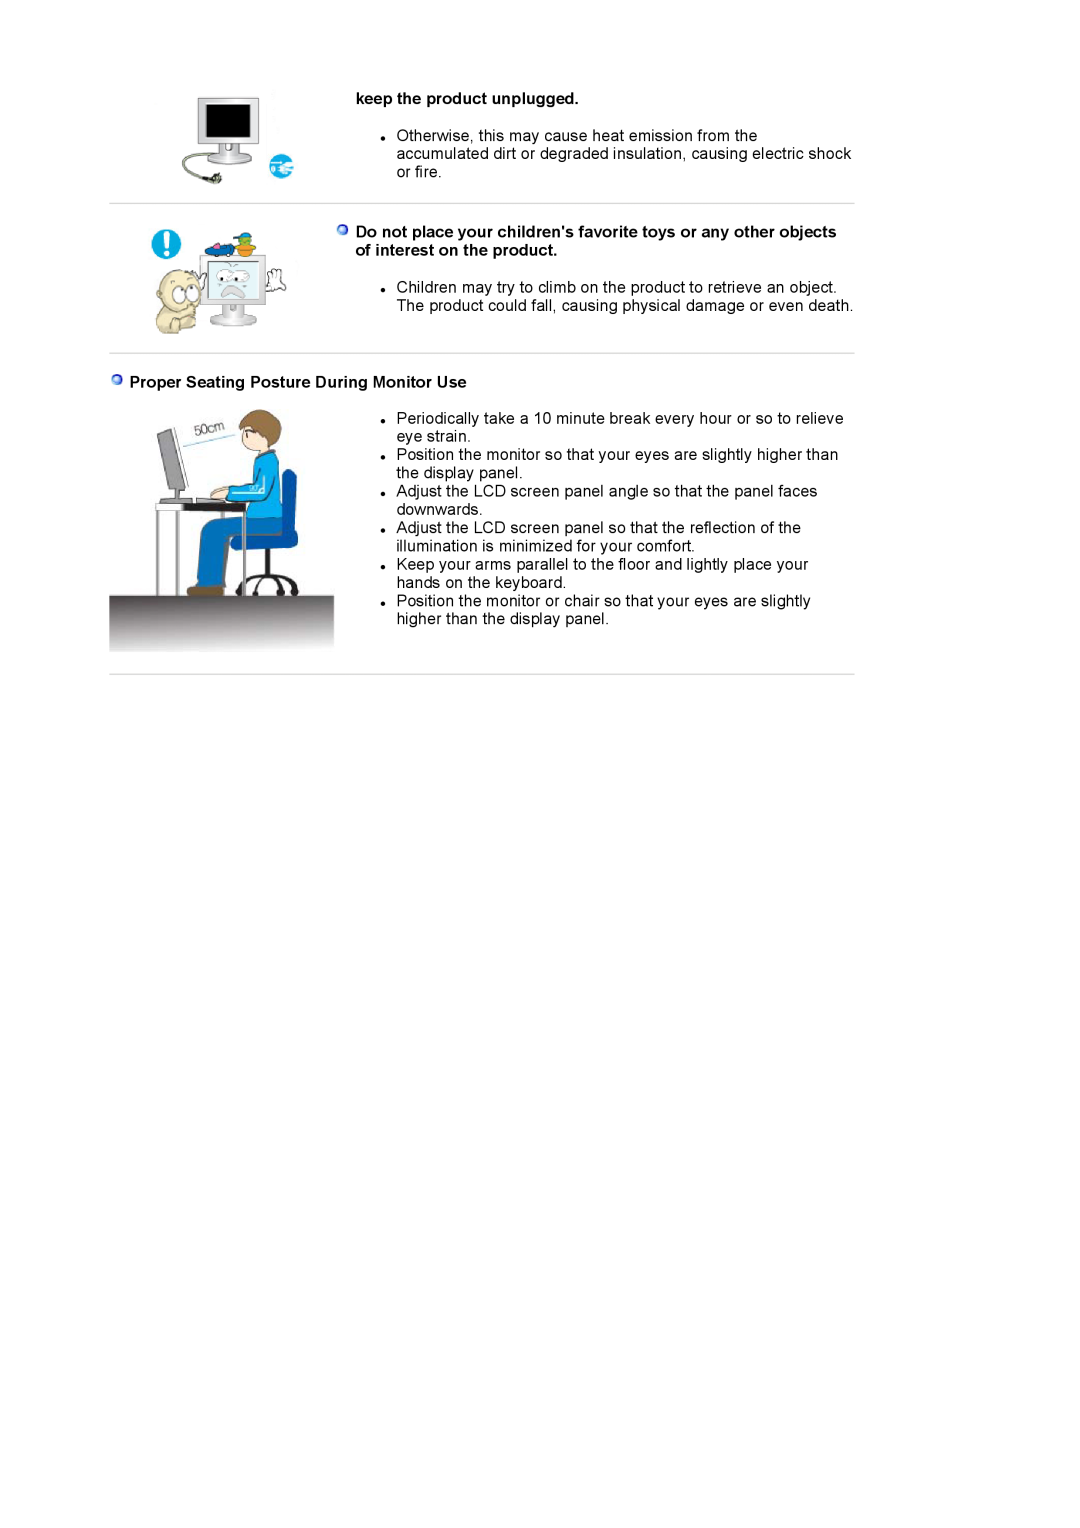 Samsung 710NT manual keep the product unplugged, Proper Seating Posture During Monitor Use 